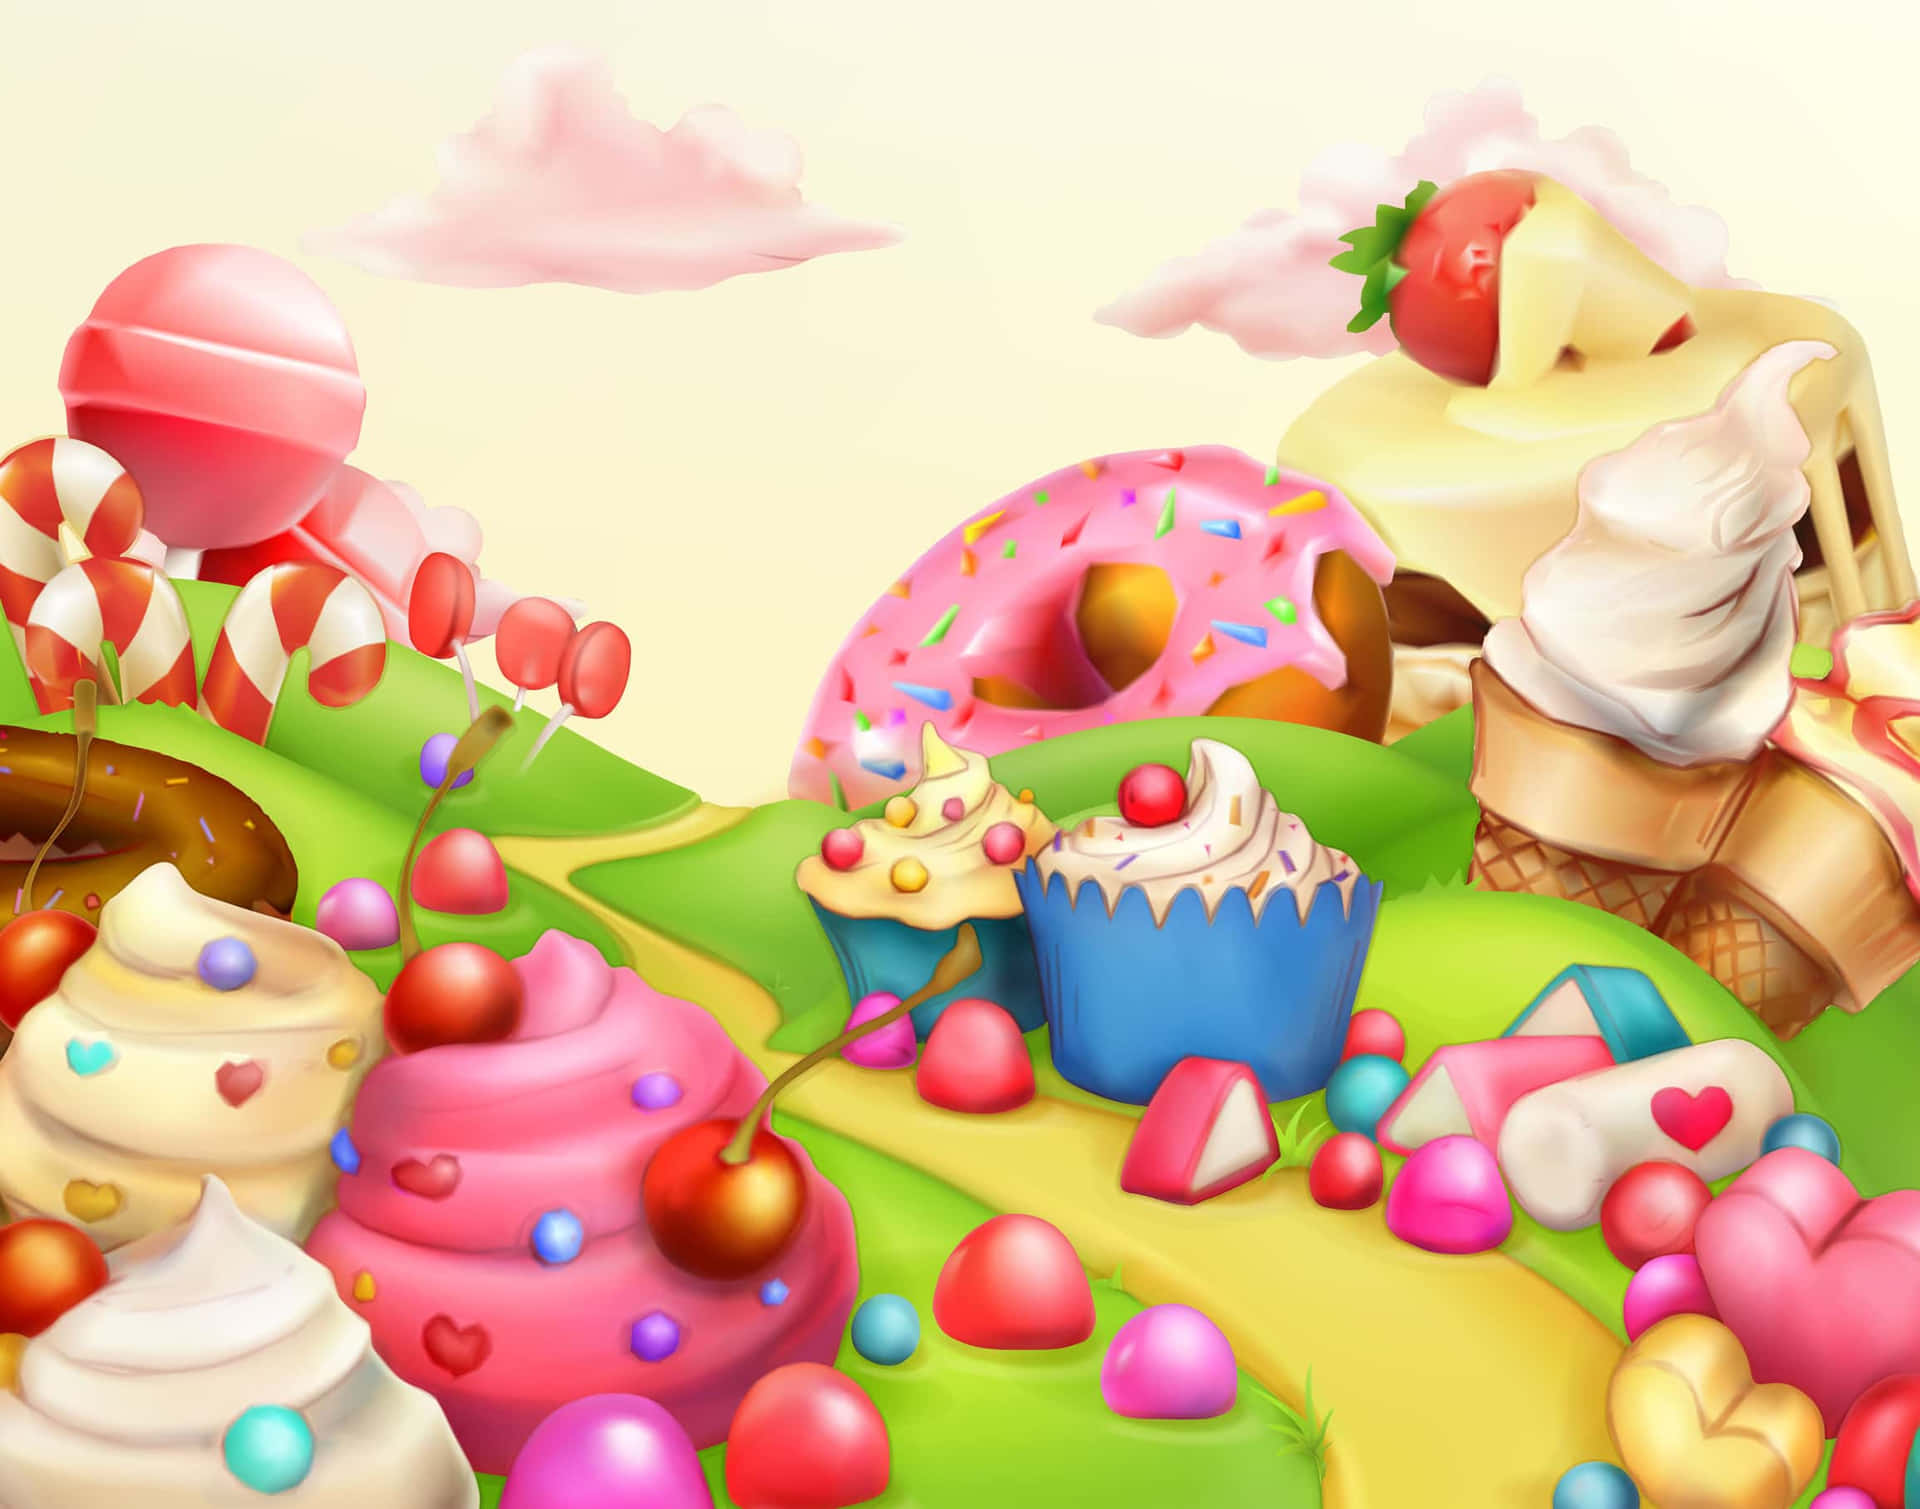 •  “Welcome to Sweet Memories - Enjoy the Fun of Candy Land!” Wallpaper